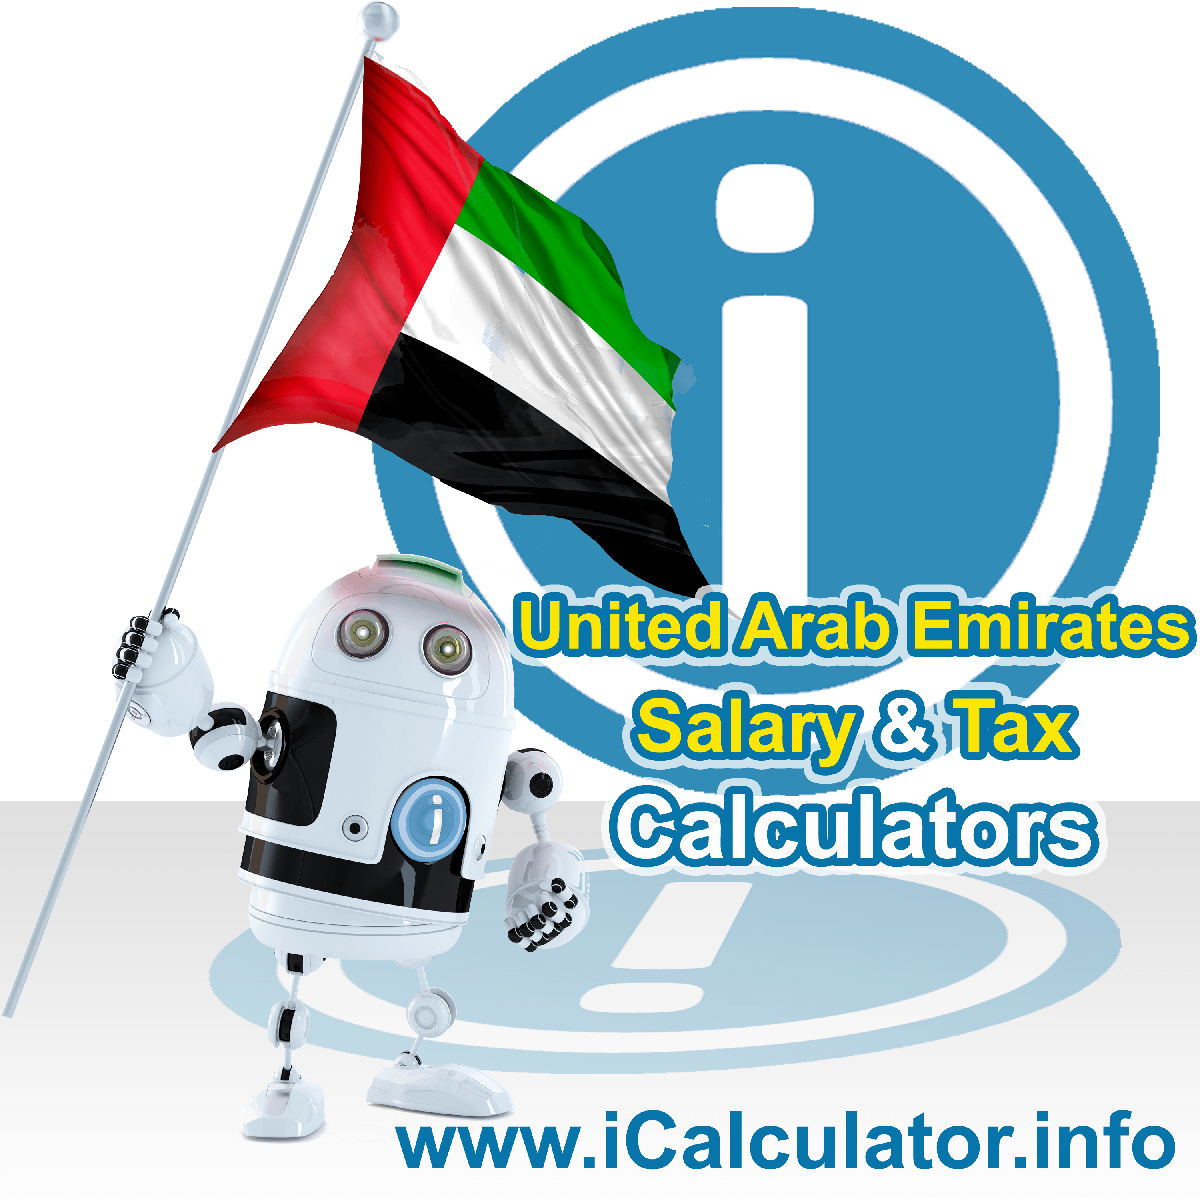 United Arab Emirates Wage Calculator. This image shows the United Arab Emirates flag and information relating to the tax formula for the United Arab Emirates Tax Calculator